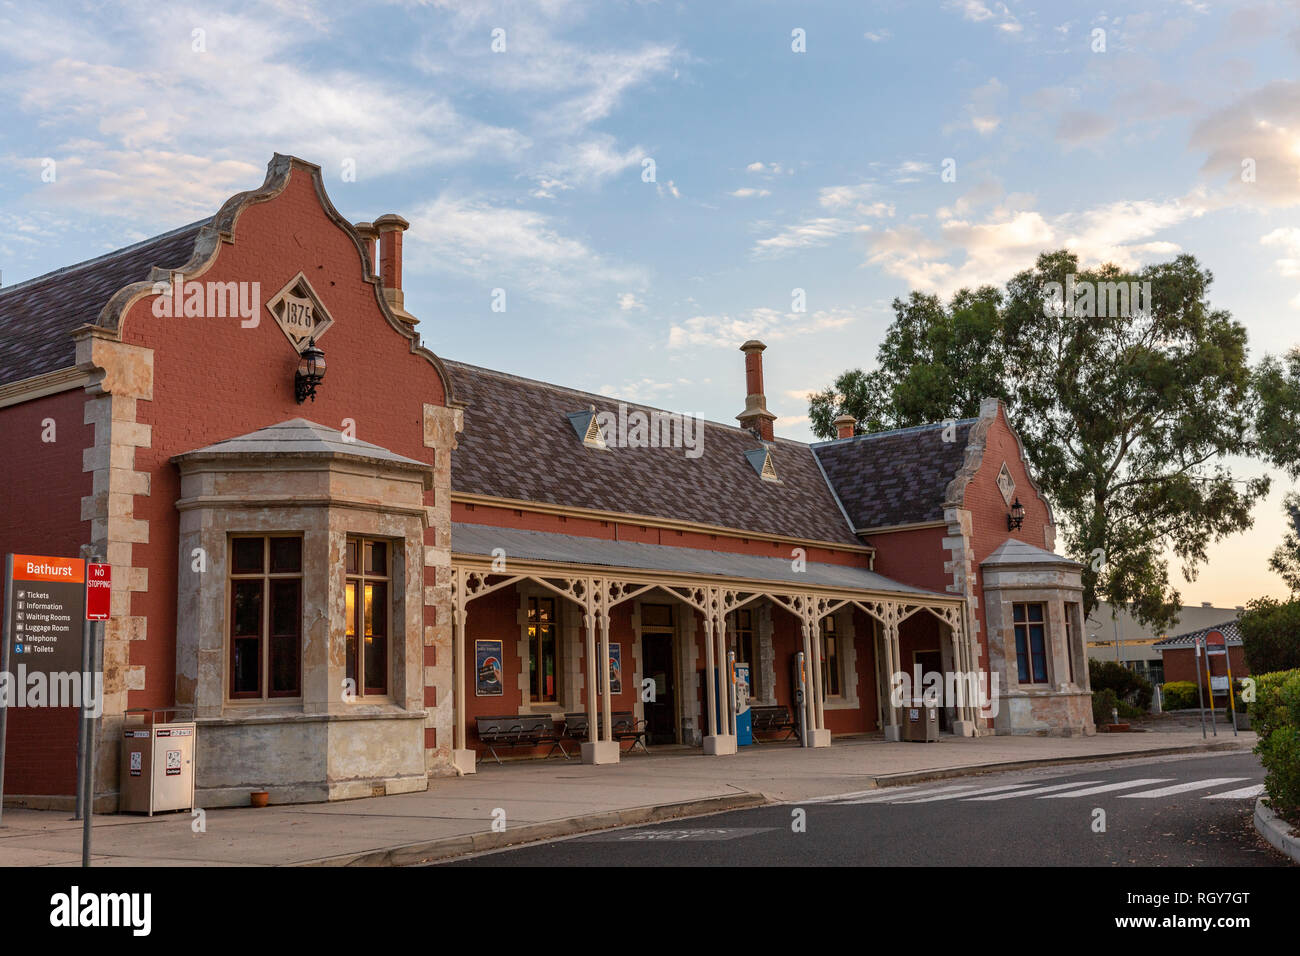 Bathurst railway station in the city of Bathurst, the rail station is a heritage listed property , New South Wales,Australia Stock Photo